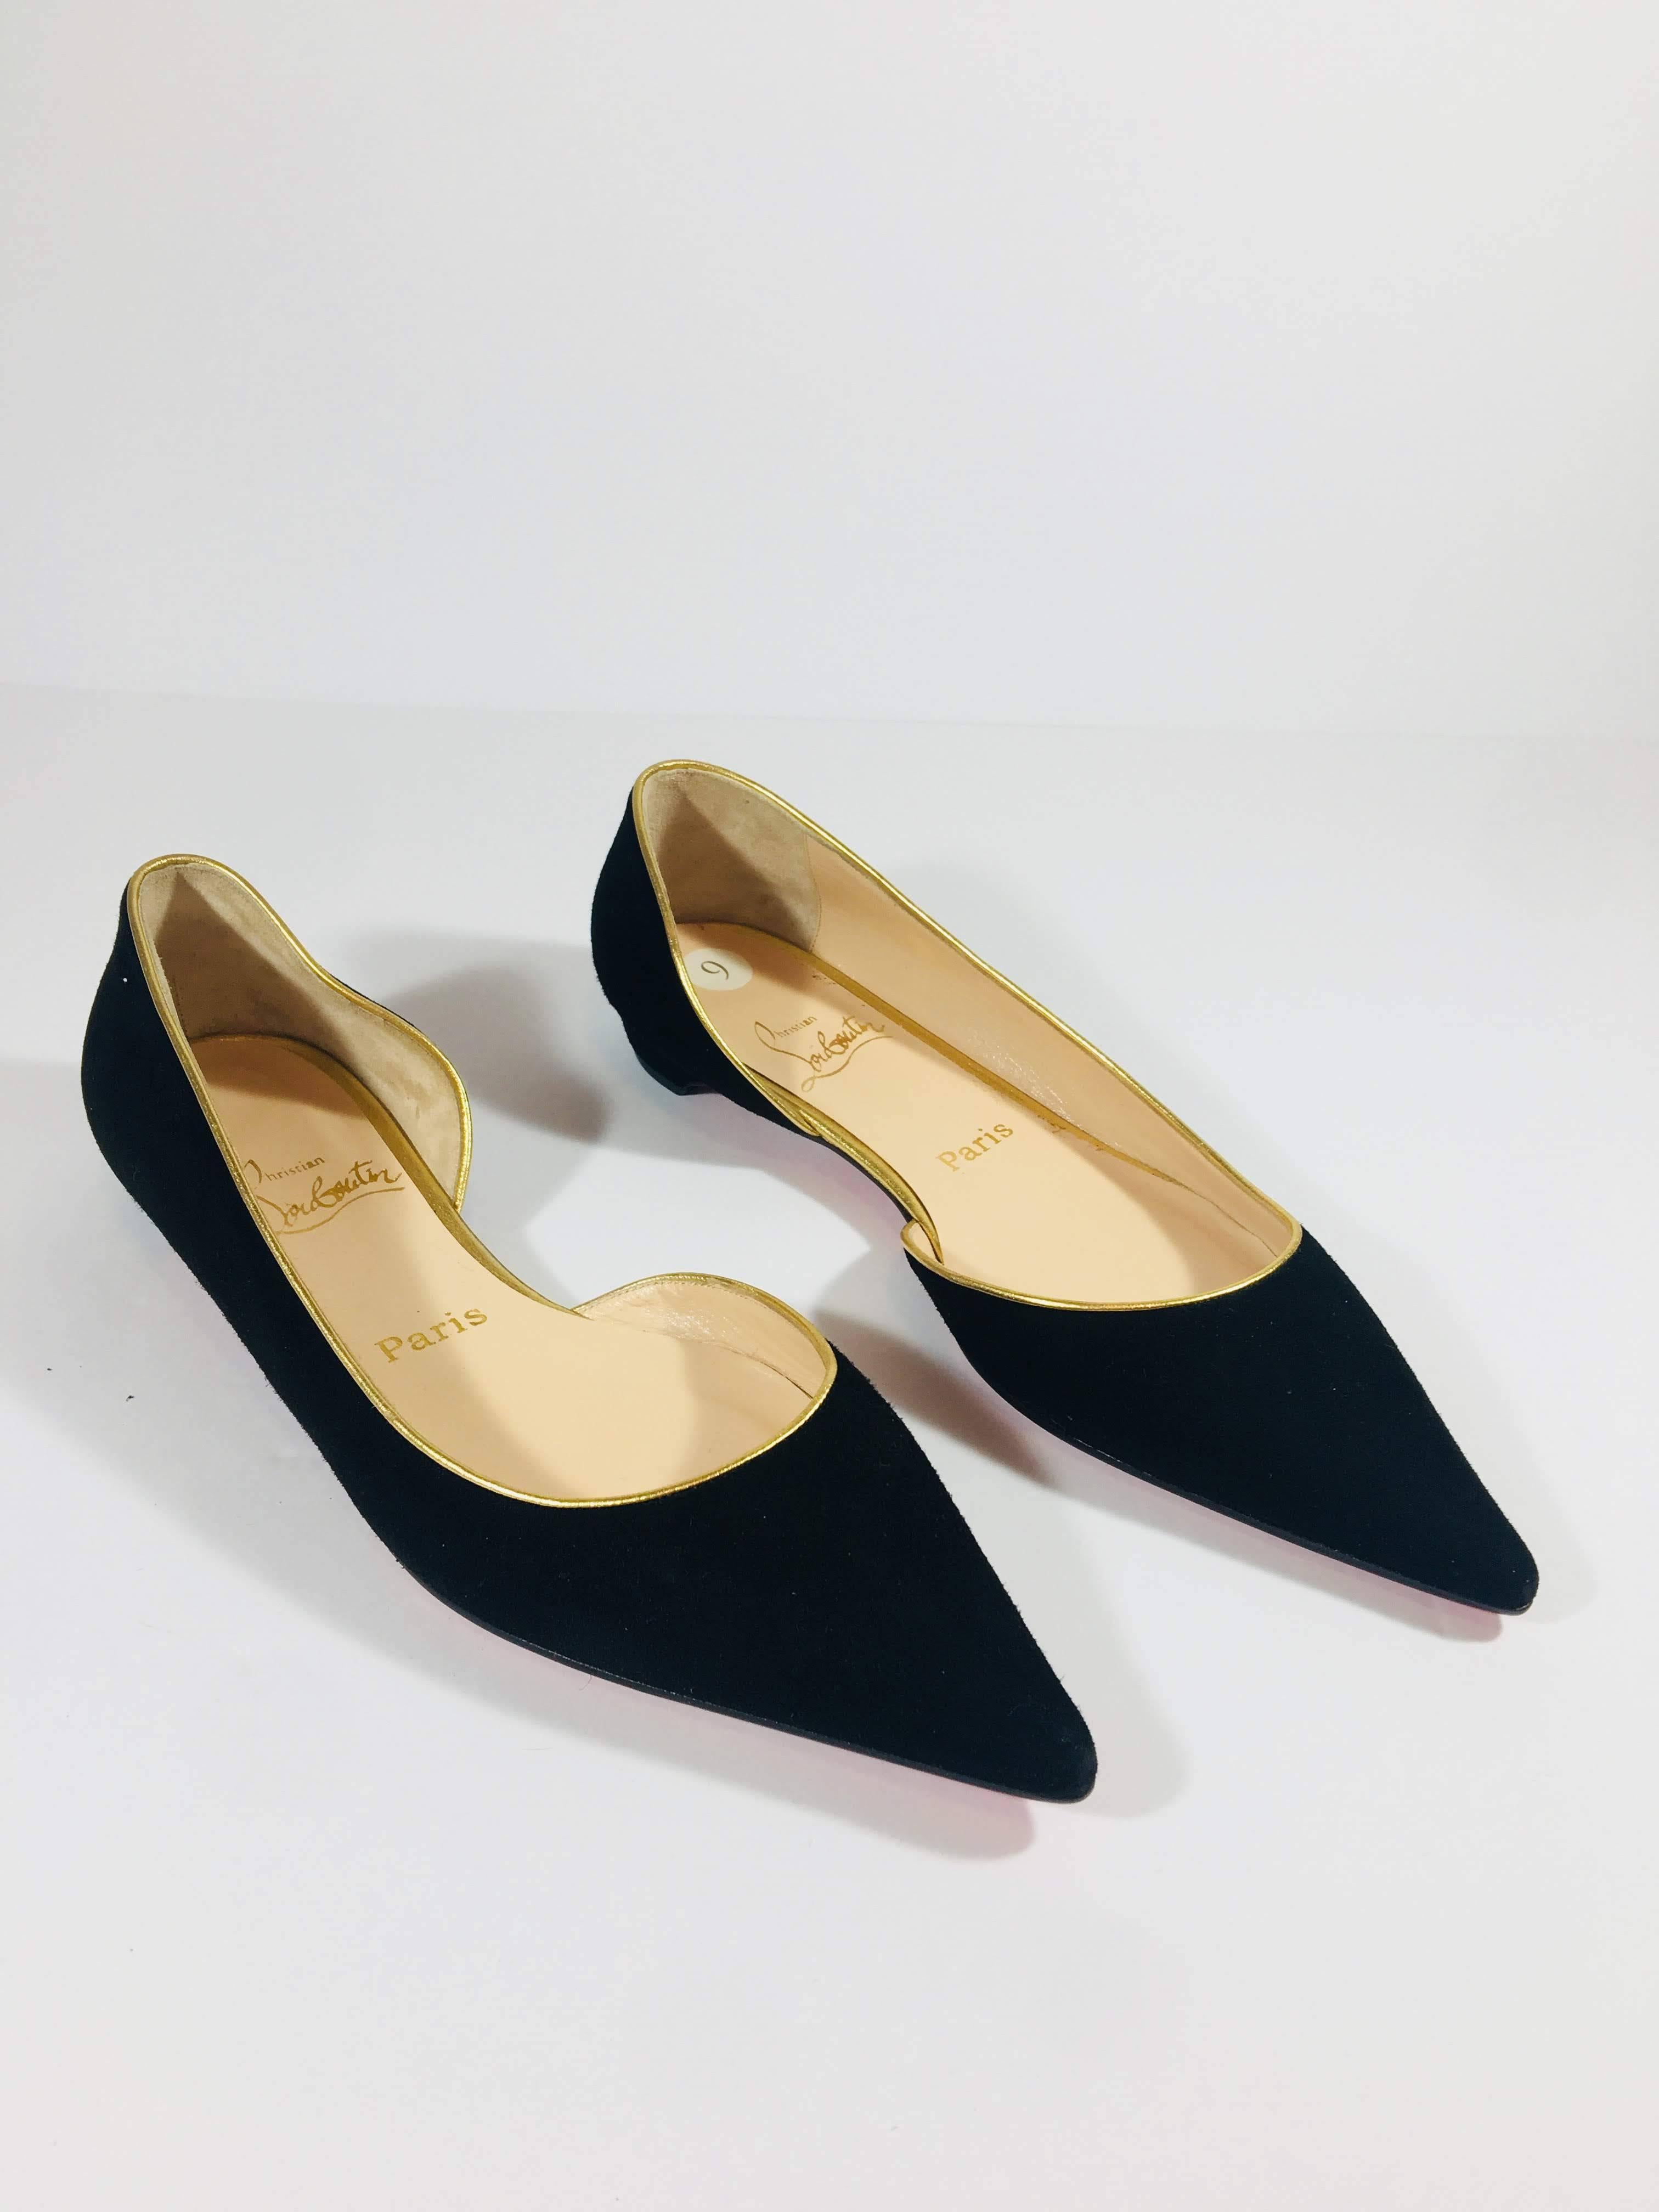 Christian Louboutin Size 39 Flats in Black Suede. Pointed Toe Half d'Orsay with Gold Leather Trim.